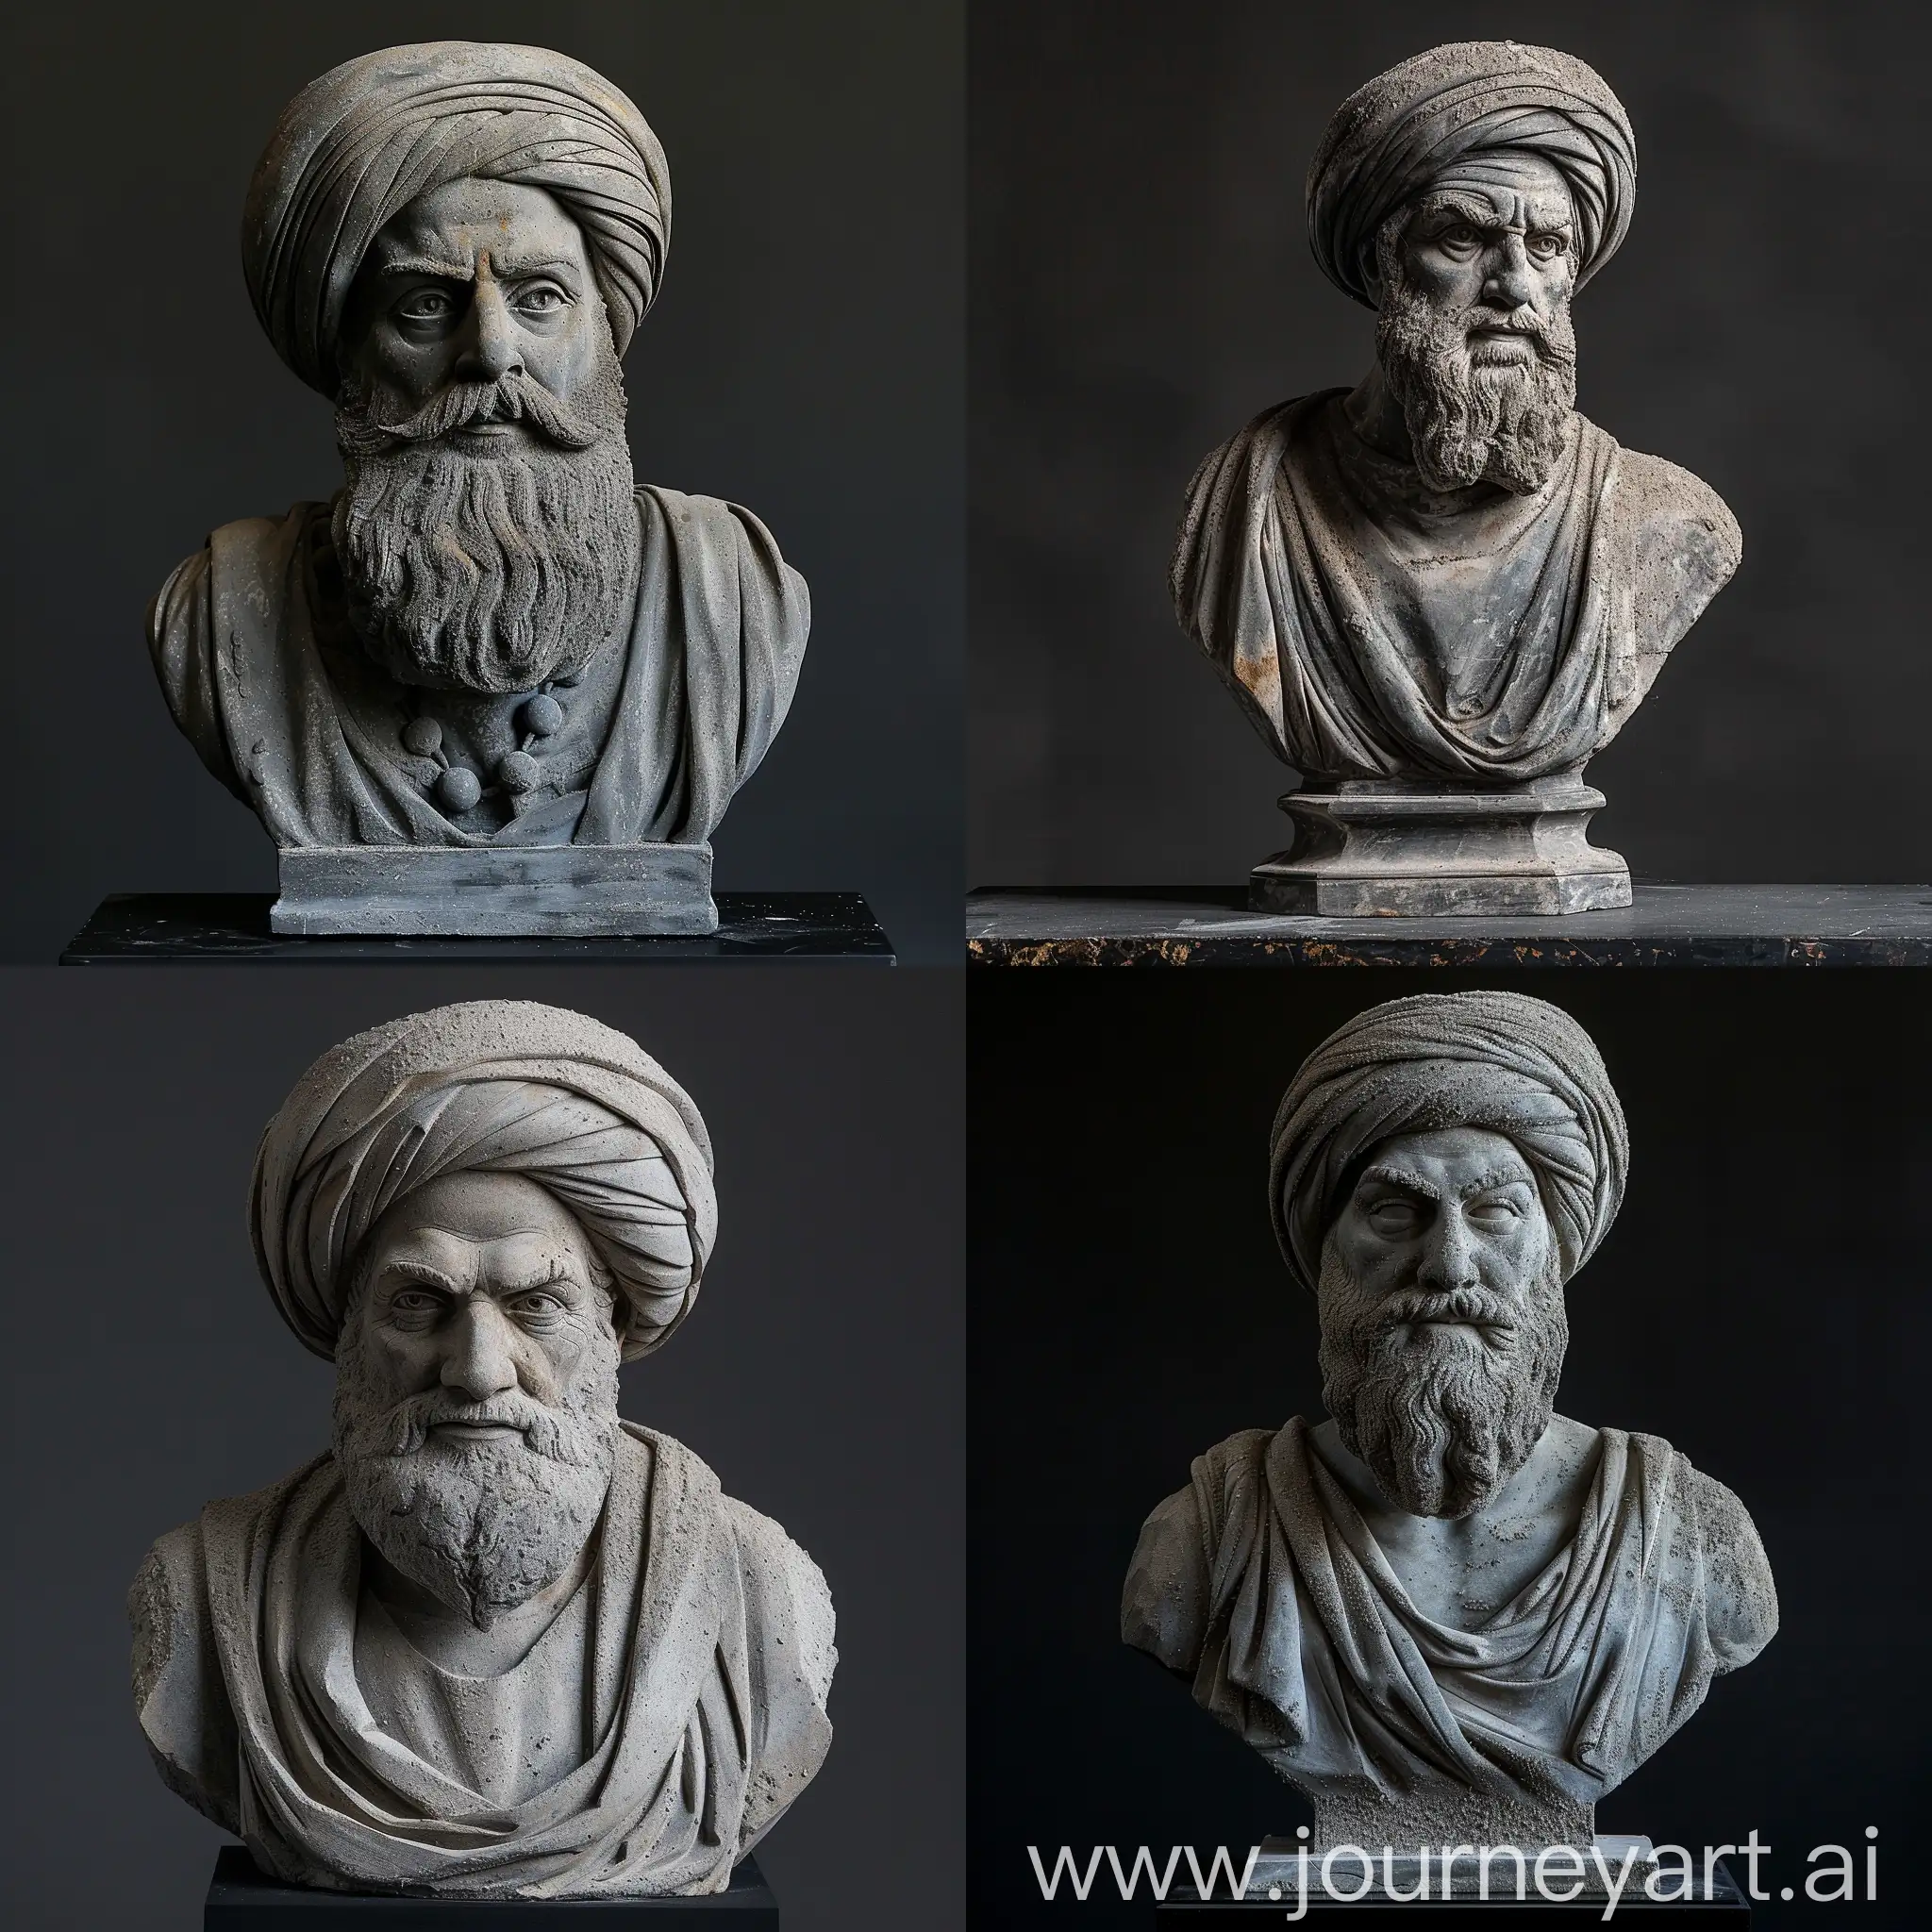 A Dusted Plaster Sculpture of Persian Philosopher, Bust Style, Black Background, Minimalism Art, Long Shot, High Precision --s 350 --v 6.0